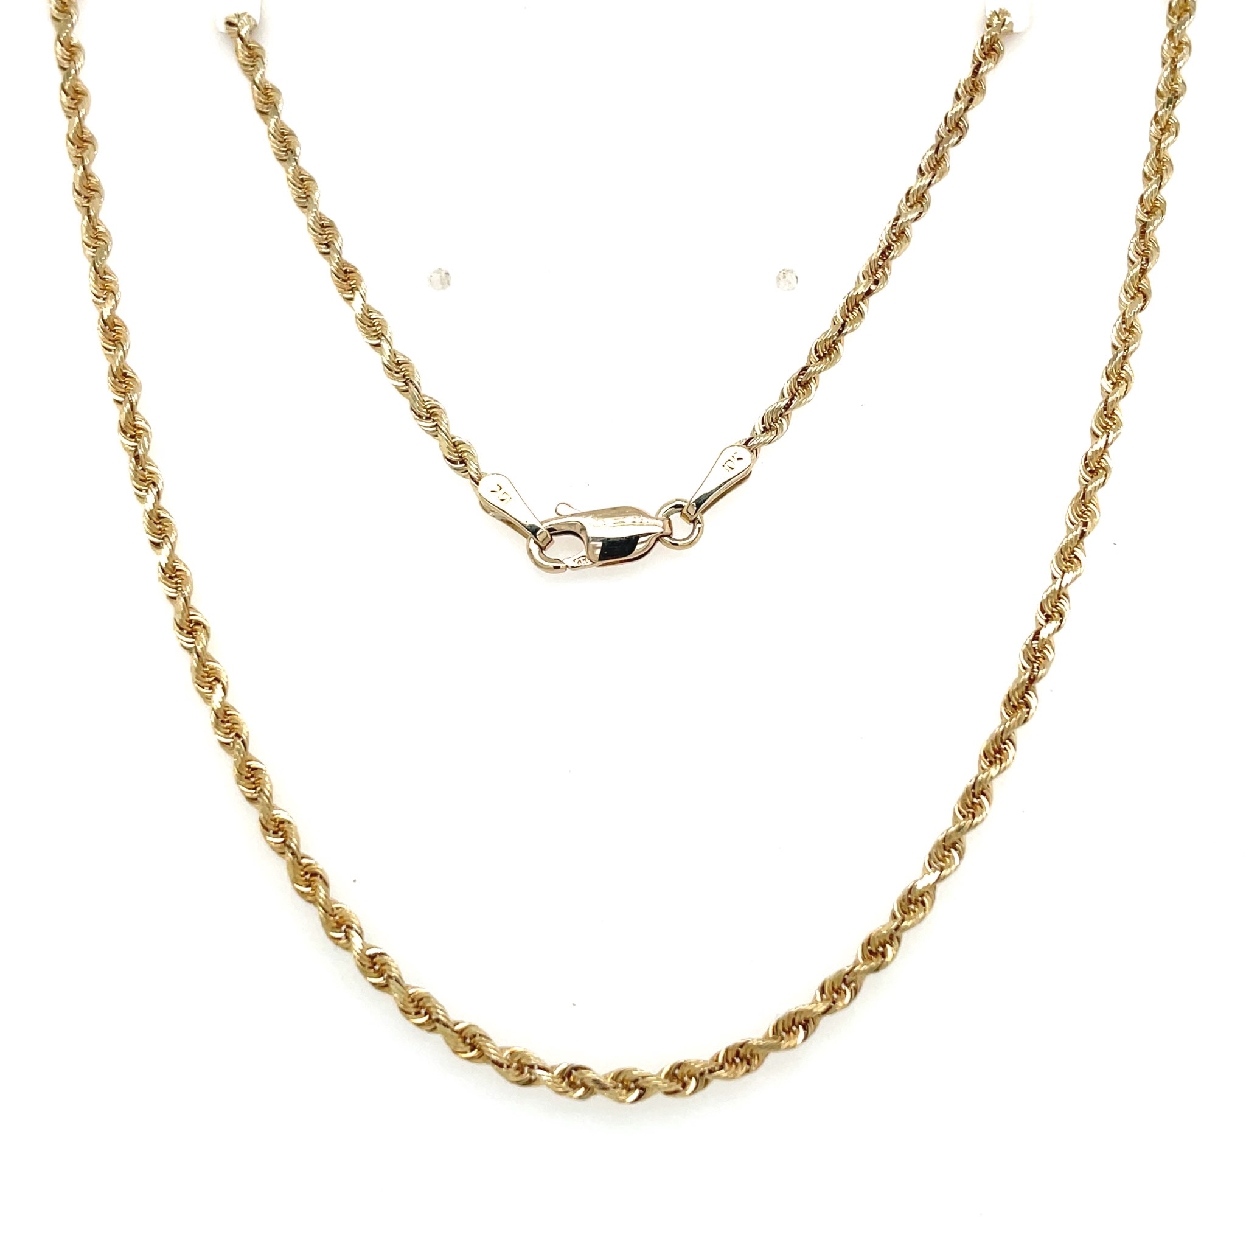 10K Yellow Gold Rope Chain with Lobster Claw Clasp

24 Inches